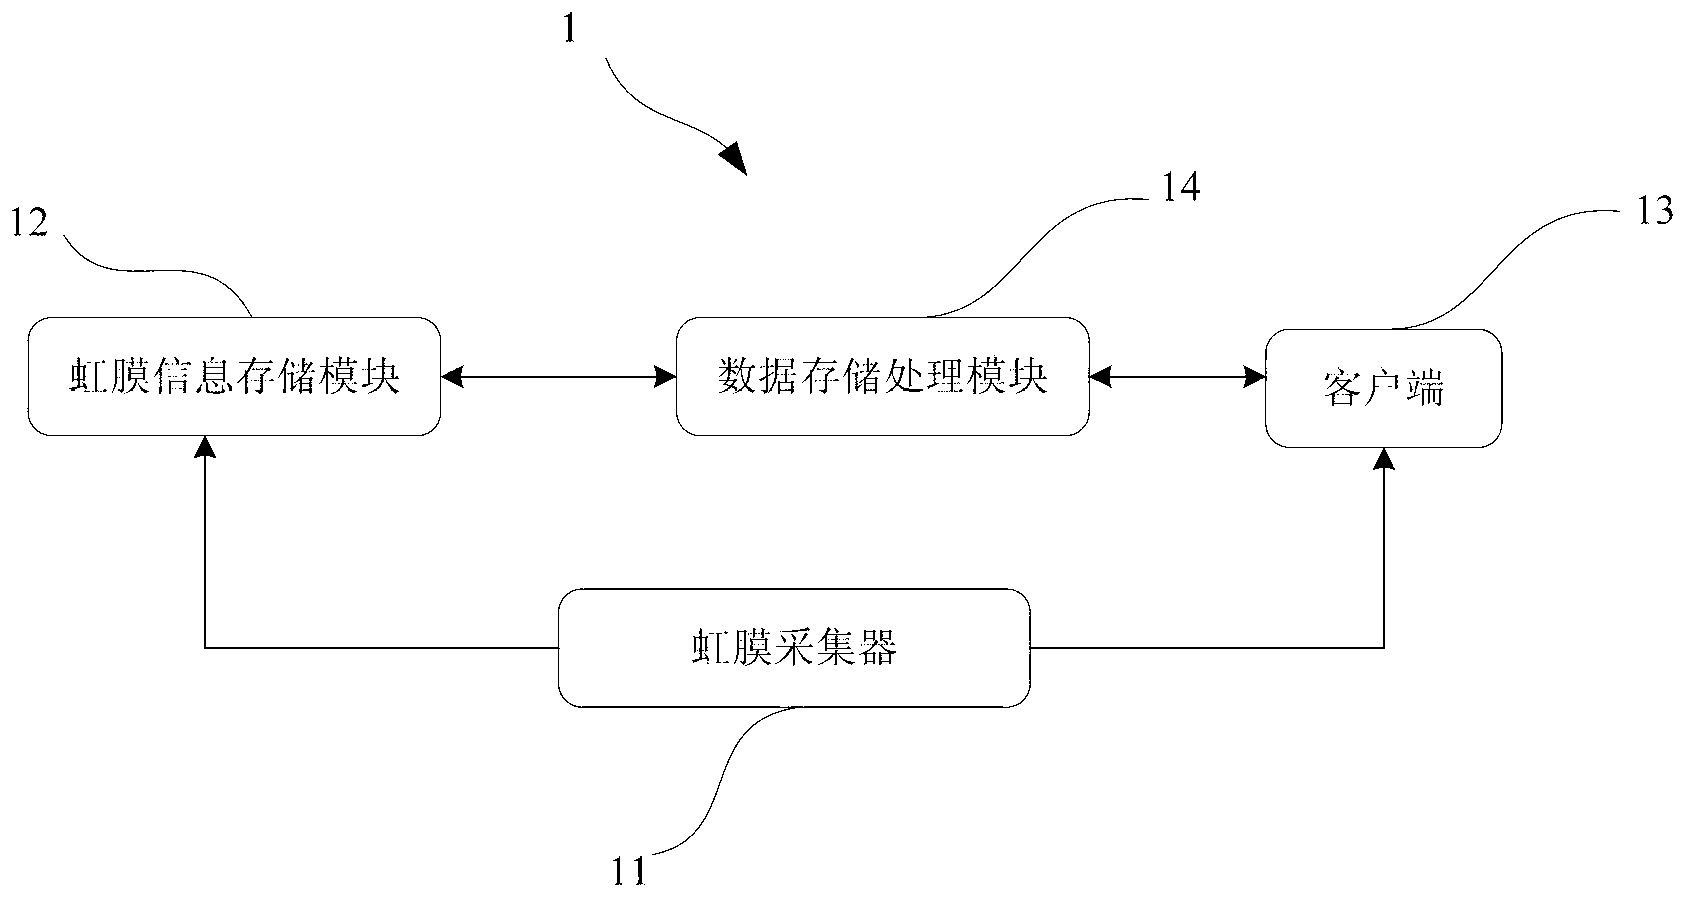 Method and system for protecting data based on iris identification